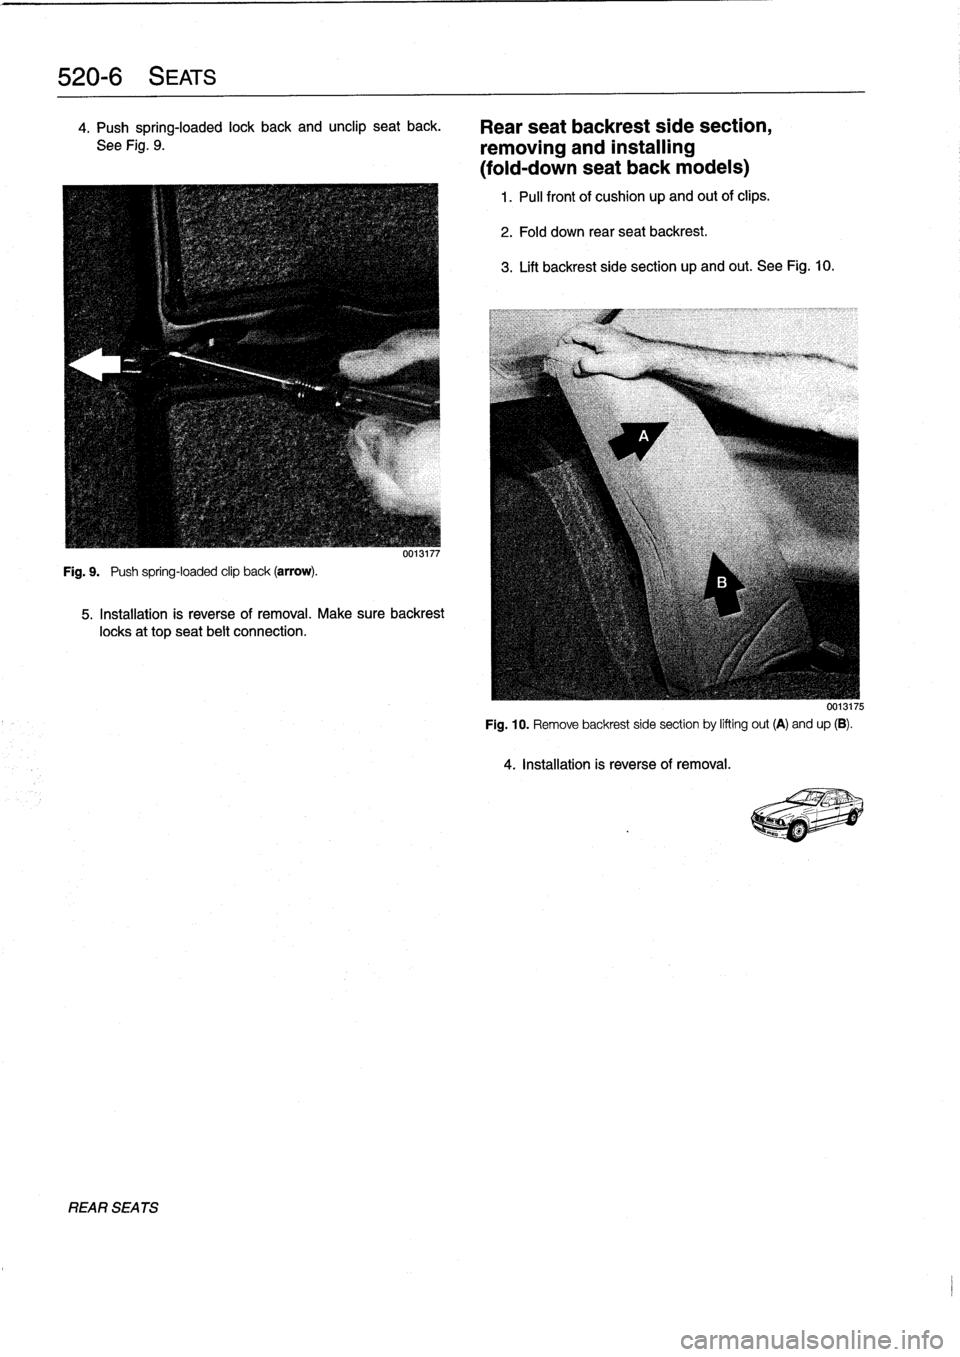 BMW 318i 1995 E36 Workshop Manual 
520-
6
SEATS

4
.
Push
spring-loaded
lock
back
and
unclip
seat
back
.

See
Fig
.
9
.

Fig
.
9
.

	

Push
spring-loaded
clip
back
(arrow)
.

UU13117

5
.
Installation
is
reverse
of
removal
.
Make
sure